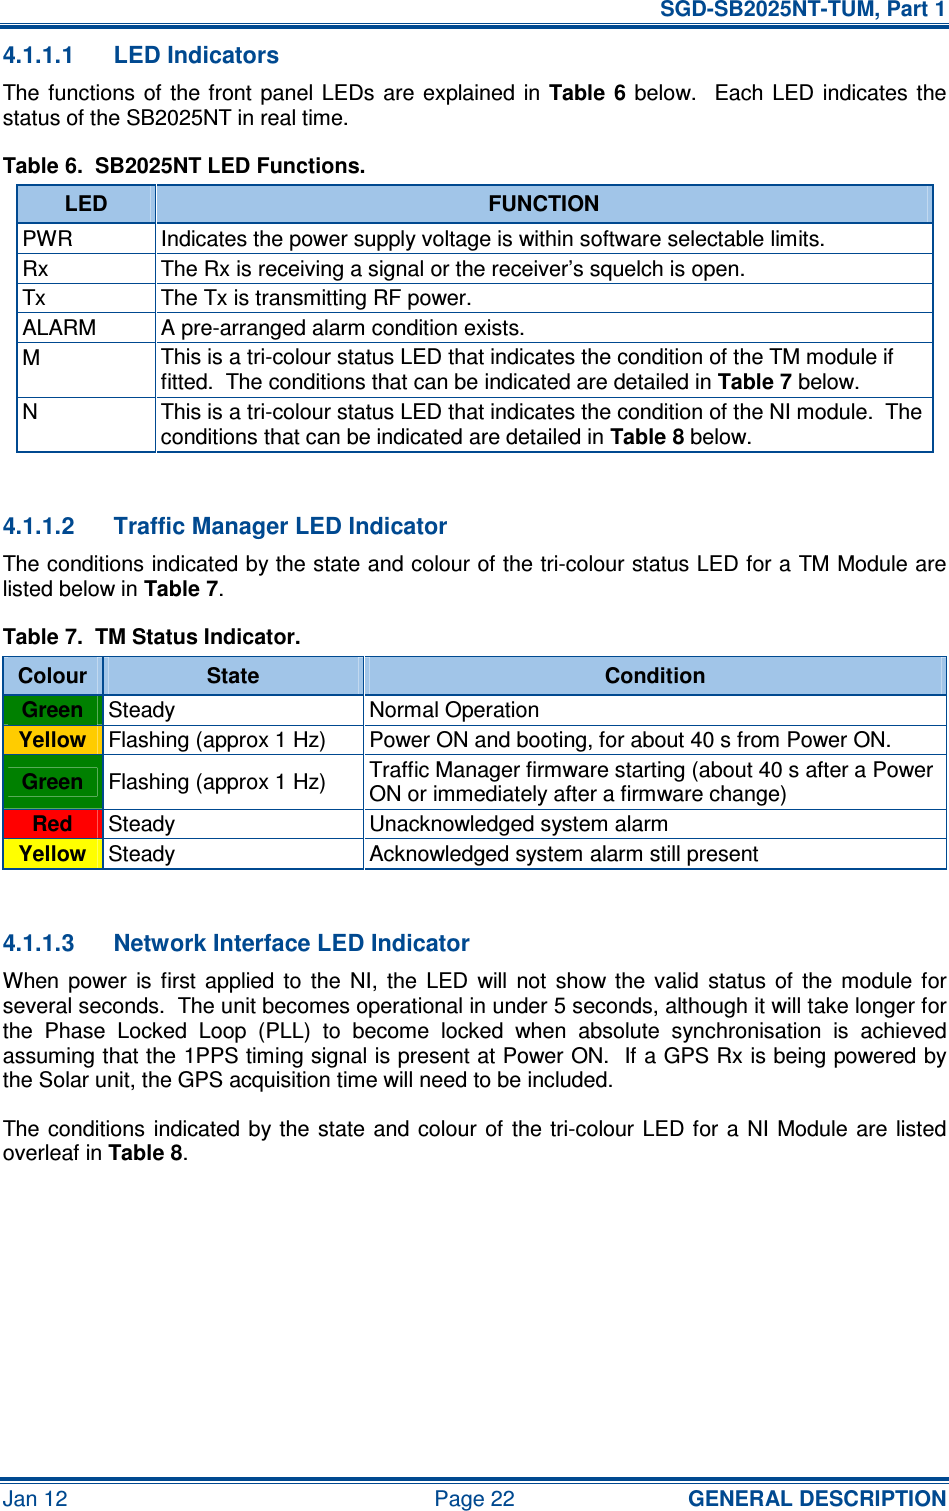   SGD-SB2025NT-TUM, Part 1 Jan 12  Page 22  GENERAL DESCRIPTION 4.1.1.1  LED Indicators The functions  of the front  panel  LEDs are  explained  in  Table  6 below.   Each  LED  indicates the status of the SB2025NT in real time. Table 6.  SB2025NT LED Functions. LED  FUNCTION PWR  Indicates the power supply voltage is within software selectable limits. Rx  The Rx is receiving a signal or the receiver’s squelch is open. Tx  The Tx is transmitting RF power. ALARM  A pre-arranged alarm condition exists. M  This is a tri-colour status LED that indicates the condition of the TM module if fitted.  The conditions that can be indicated are detailed in Table 7 below. N  This is a tri-colour status LED that indicates the condition of the NI module.  The conditions that can be indicated are detailed in Table 8 below.  4.1.1.2  Traffic Manager LED Indicator The conditions indicated by the state and colour of the tri-colour status LED for a TM Module are listed below in Table 7. Table 7.  TM Status Indicator. Colour  State  Condition Green  Steady  Normal Operation Yellow  Flashing (approx 1 Hz)  Power ON and booting, for about 40 s from Power ON. Green  Flashing (approx 1 Hz)  Traffic Manager firmware starting (about 40 s after a Power ON or immediately after a firmware change) Red  Steady  Unacknowledged system alarm Yellow  Steady  Acknowledged system alarm still present  4.1.1.3  Network Interface LED Indicator When  power  is  first  applied  to  the  NI,  the  LED  will  not  show  the  valid  status  of  the  module  for several seconds.  The unit becomes operational in under 5 seconds, although it will take longer for the  Phase  Locked  Loop  (PLL)  to  become  locked  when  absolute  synchronisation  is  achieved assuming that the 1PPS timing signal is present at Power ON.  If a GPS Rx is being powered by the Solar unit, the GPS acquisition time will need to be included. The conditions  indicated by the  state  and  colour  of the tri-colour LED for  a  NI Module  are  listed overleaf in Table 8.  